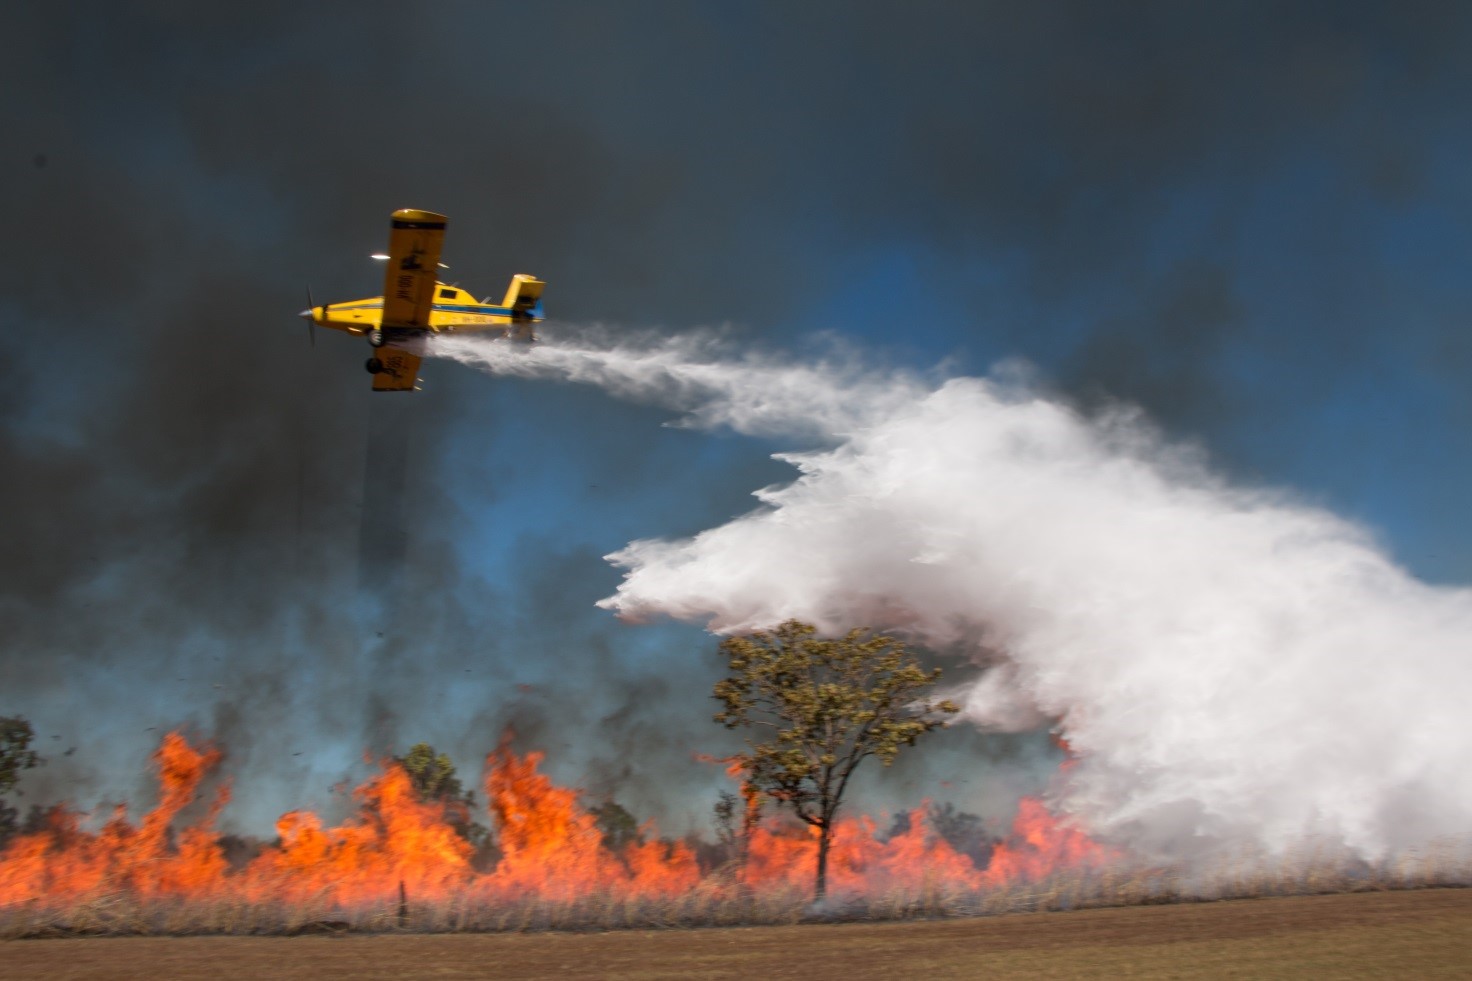 Yellow plane flying above fire burning in low trees, dropping water on the fire.